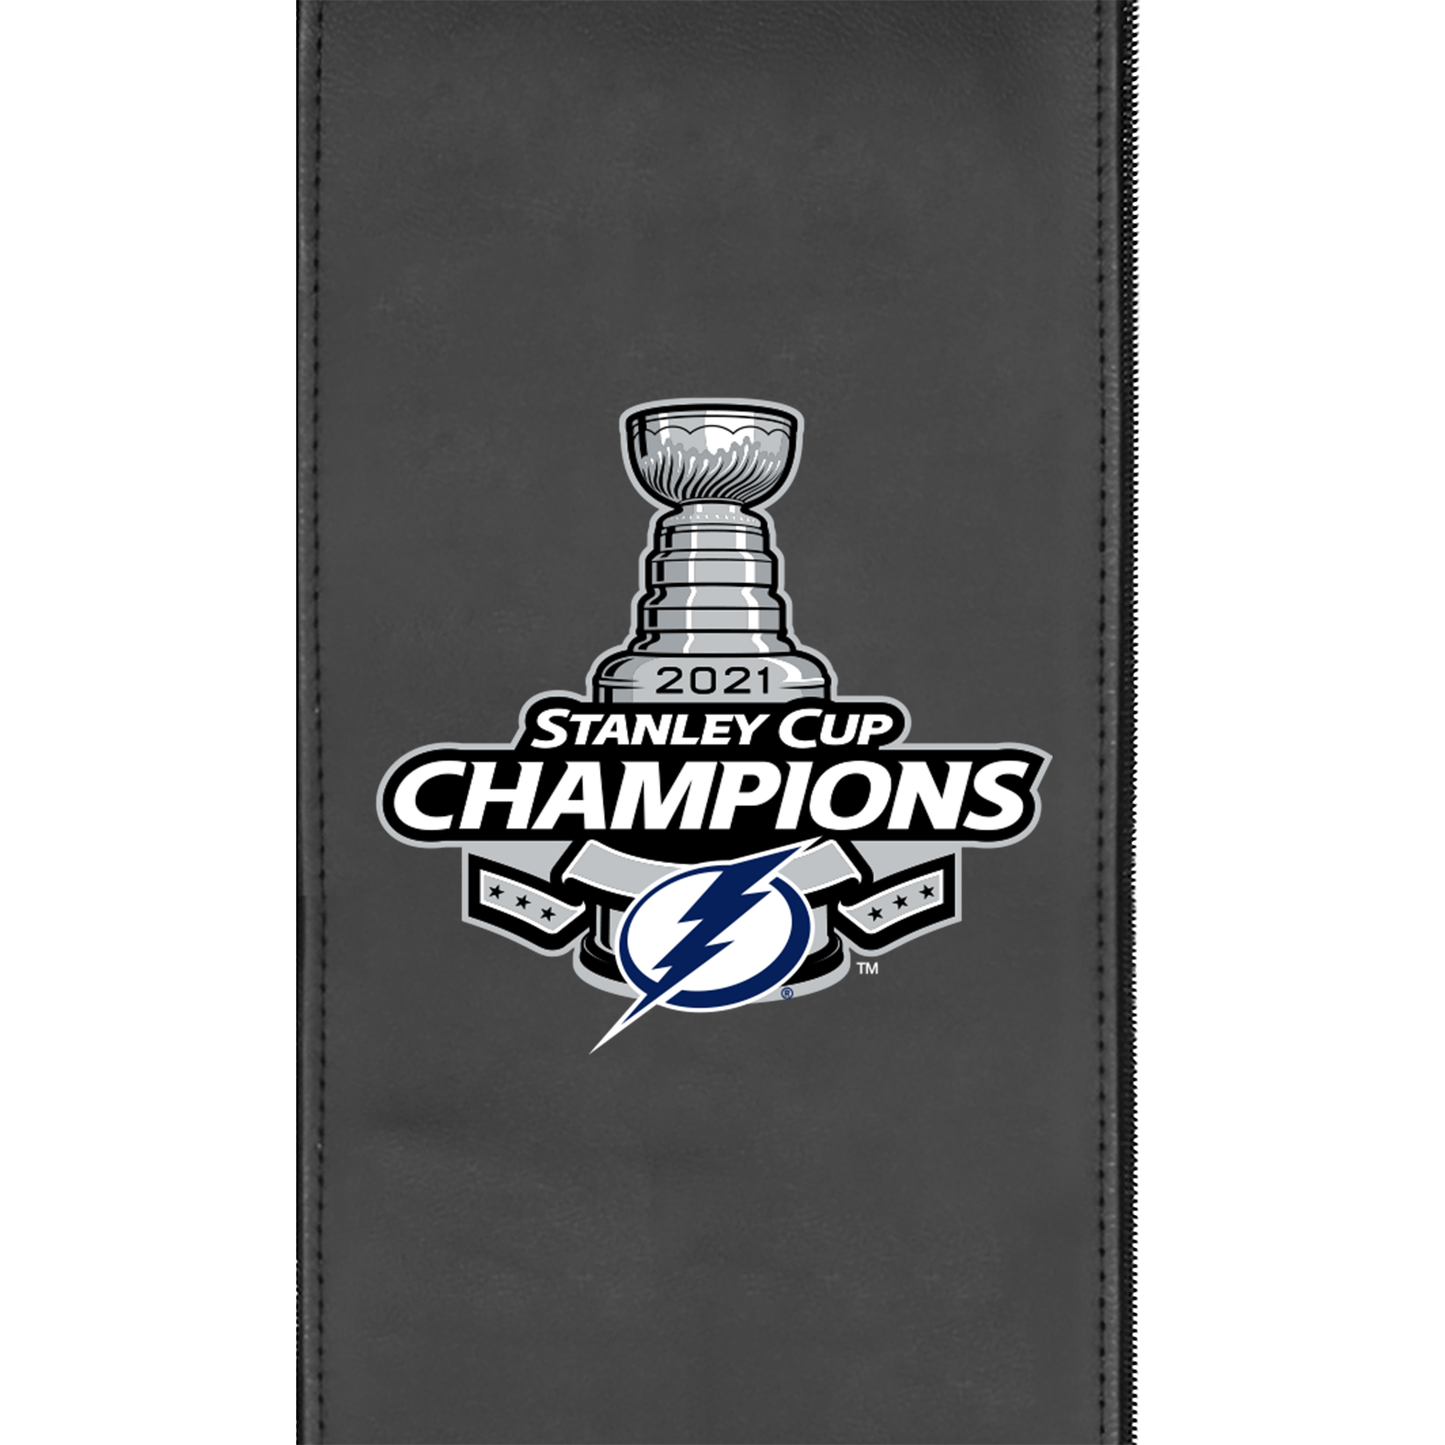 Relax Home Theater Recliner with Tampa Bay Lightning 2021 Stanley Cup Champions Logo